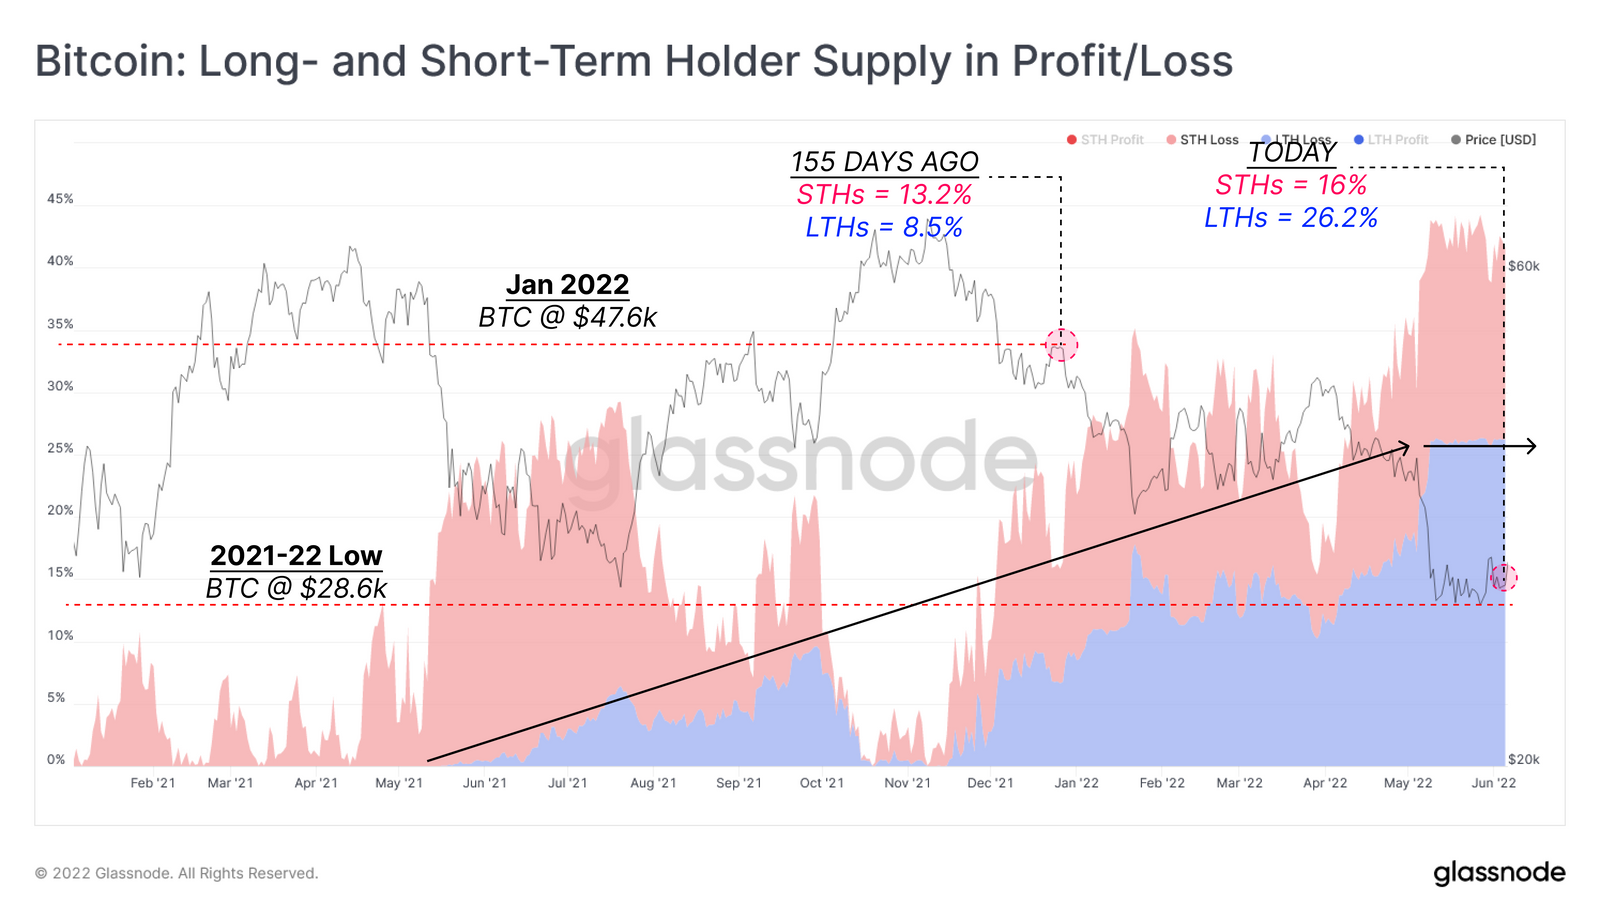 Glassnode's Bitcoin Long and Short-Term Holder Supply in Profit/Loss